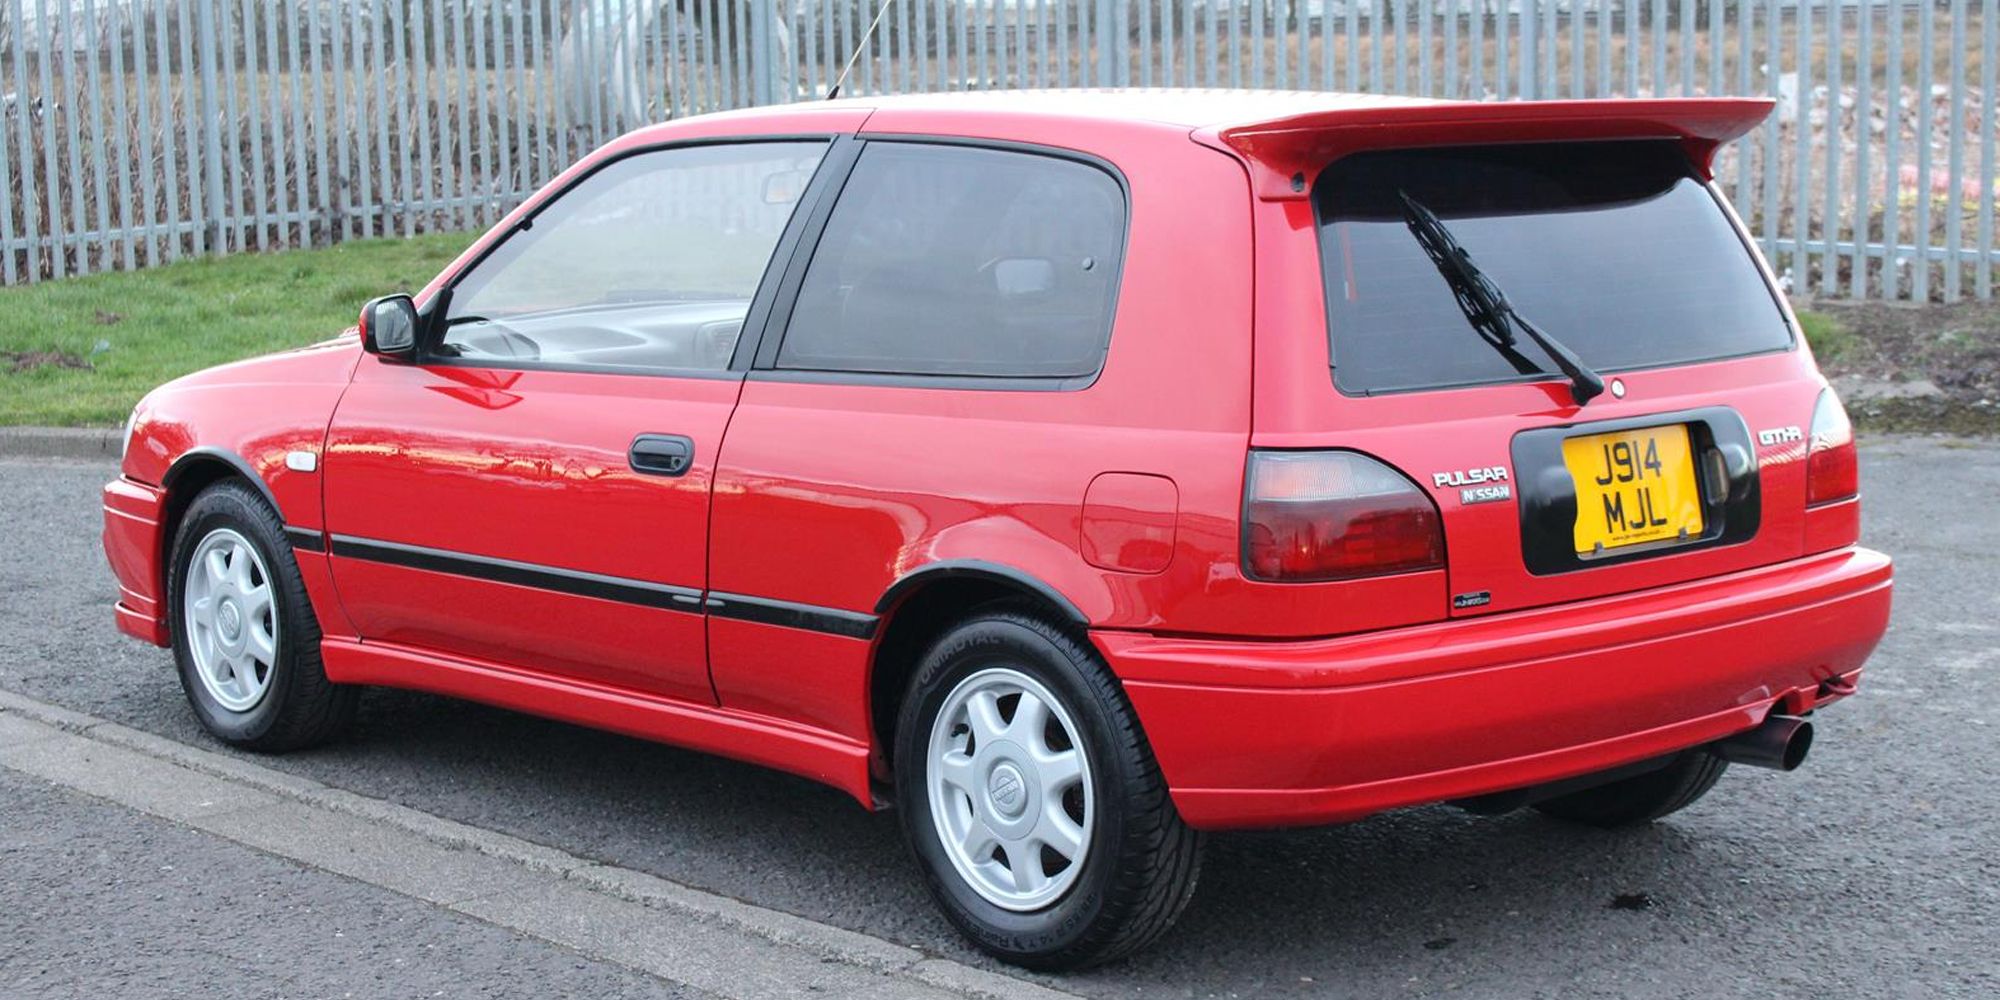 Rear 3/4 view of a red Pulsar GTI-R